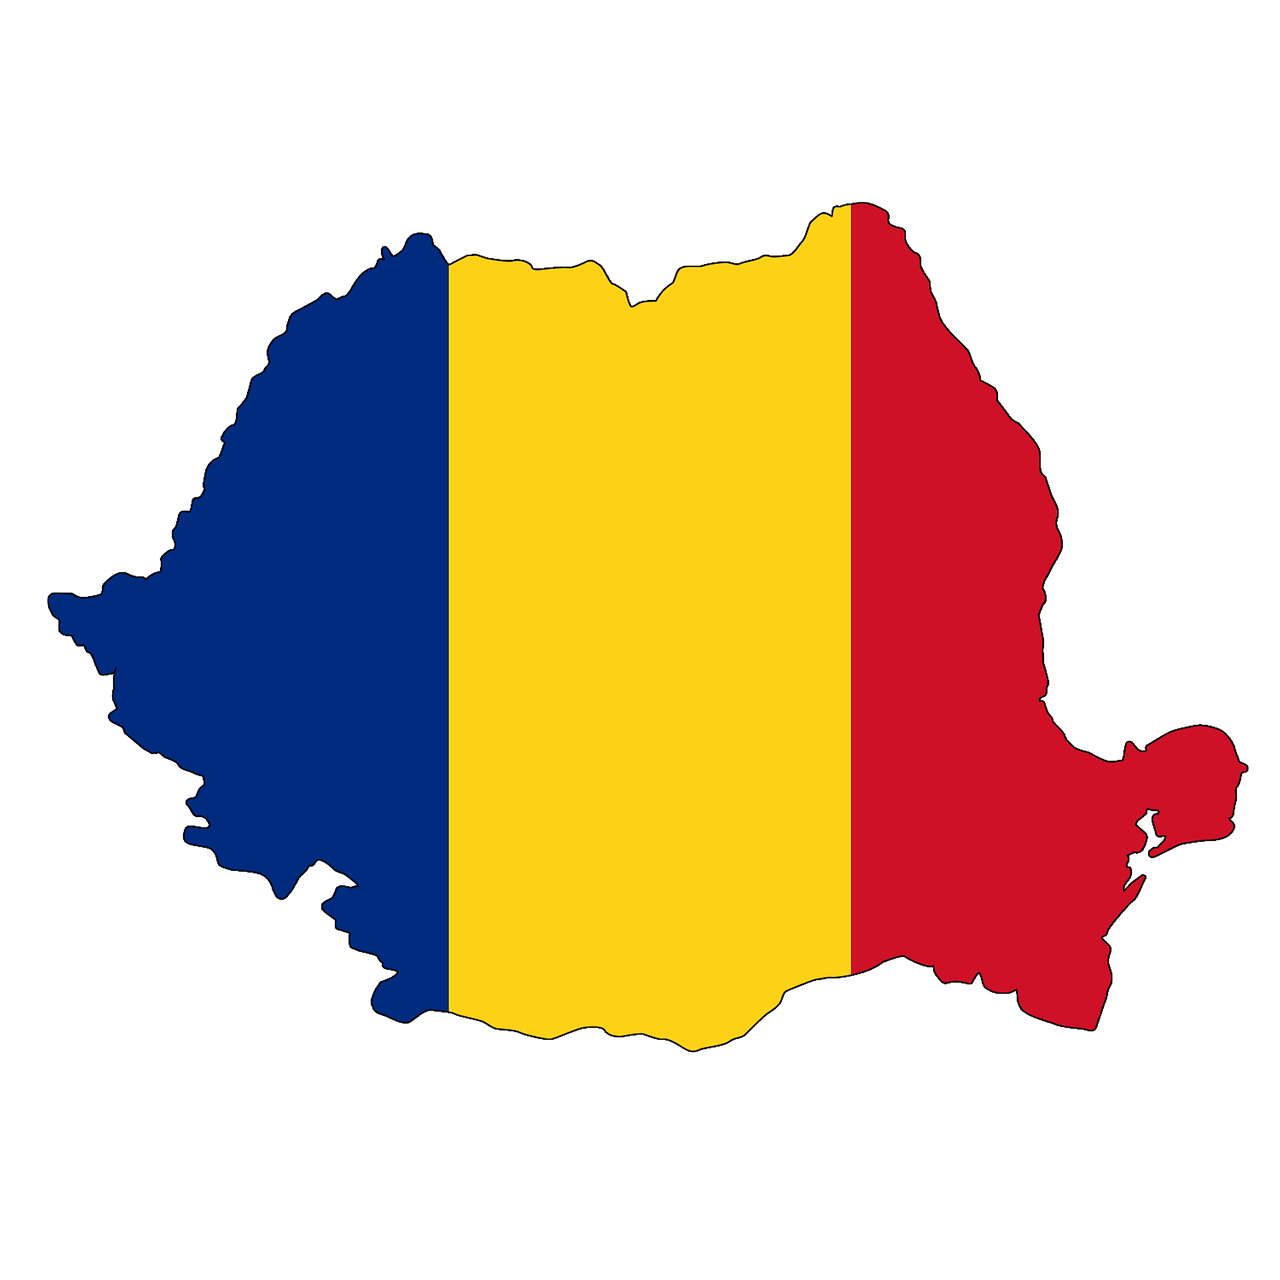 If it is no longer possible in Romania, let's try a registration in the Netherlands